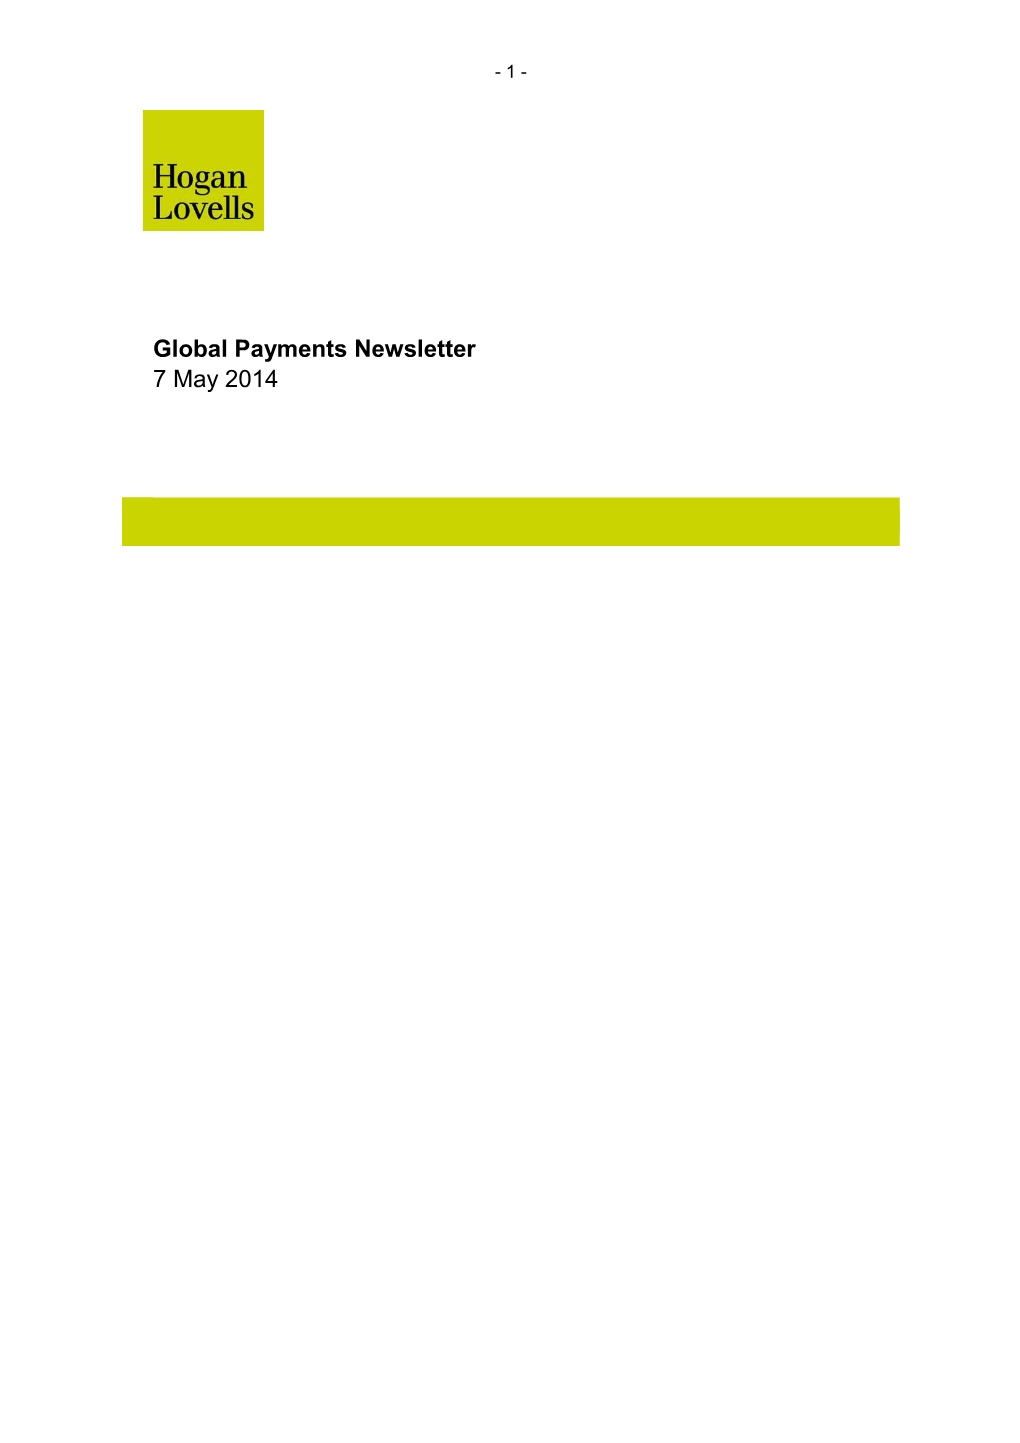 Global Payments Newsletter 7 May 2014 - 2